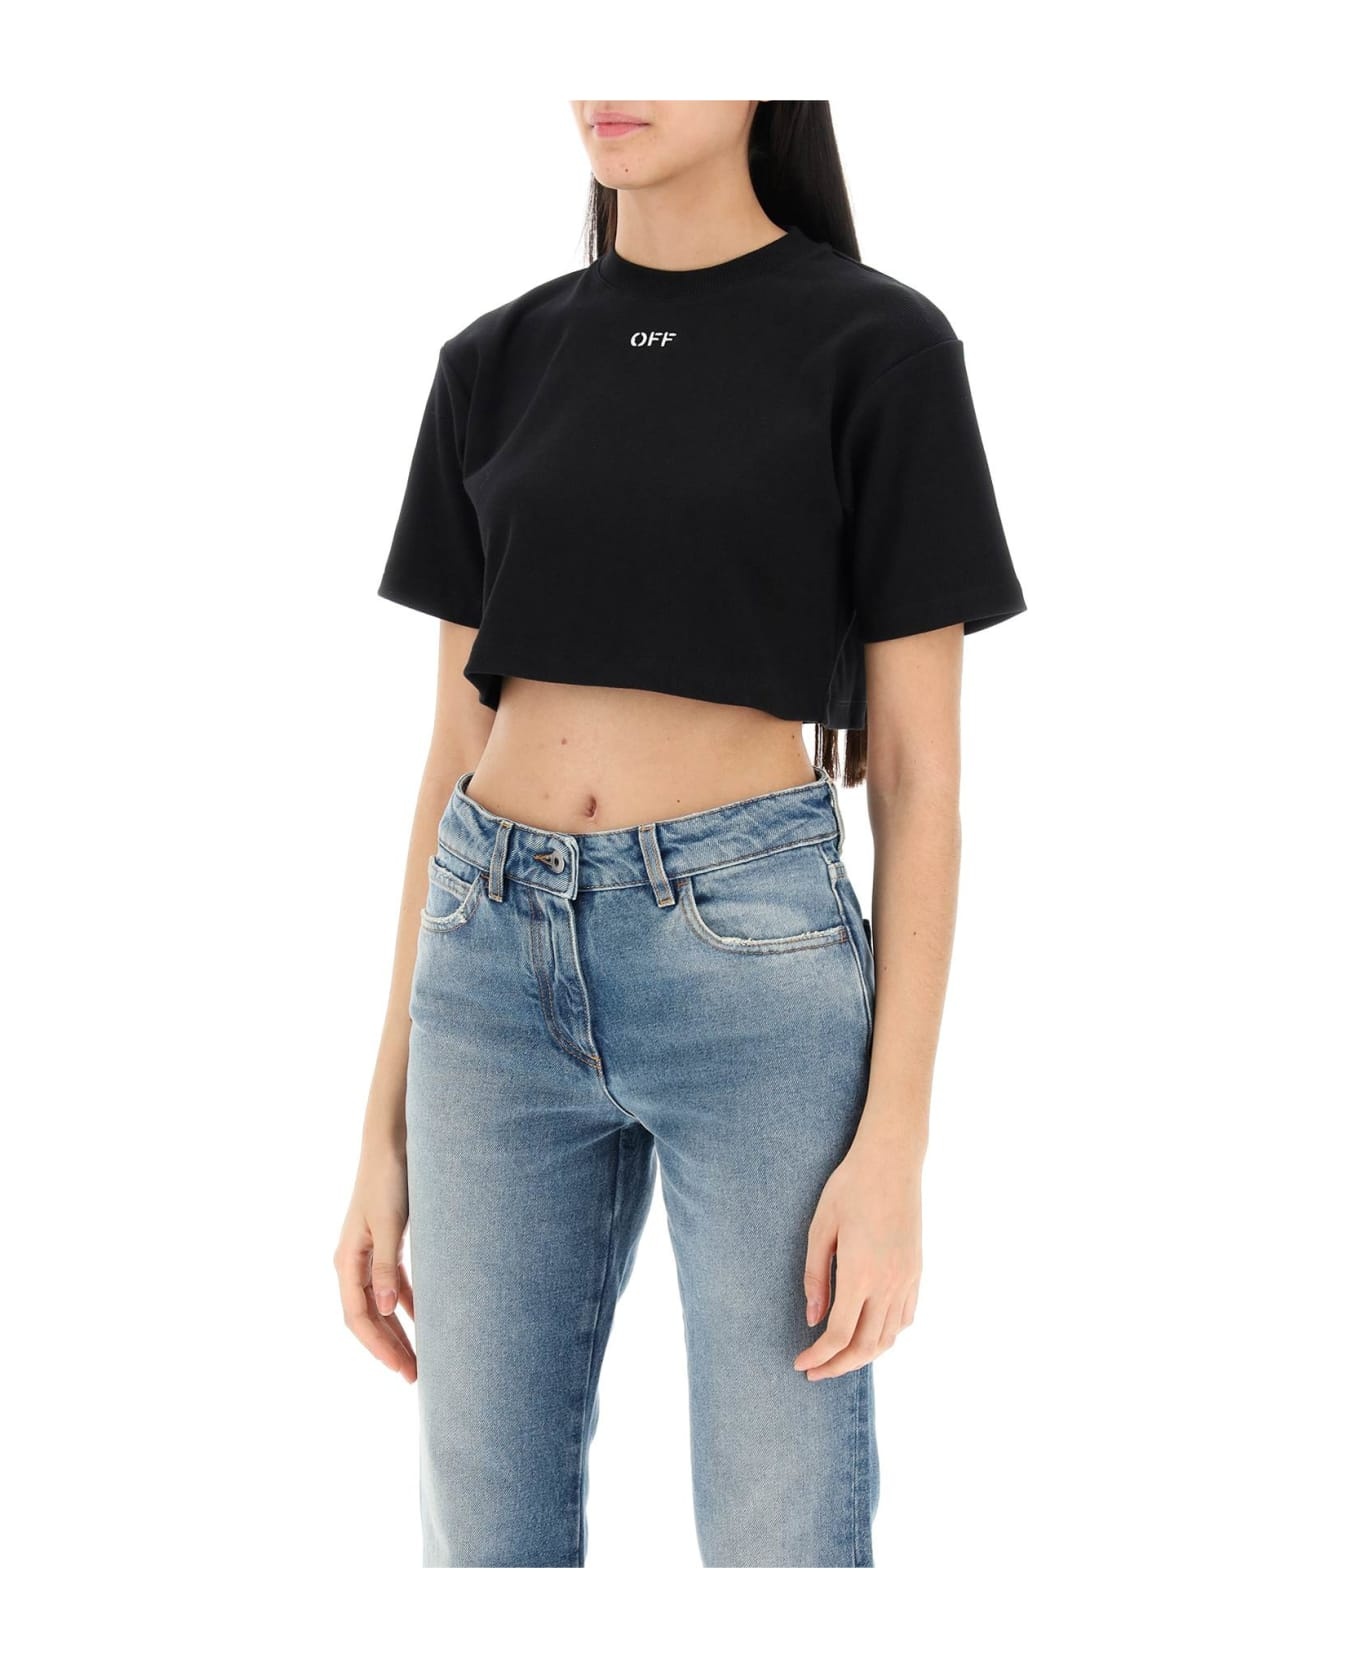 Off Stamp Rib Cropped Tee - 4